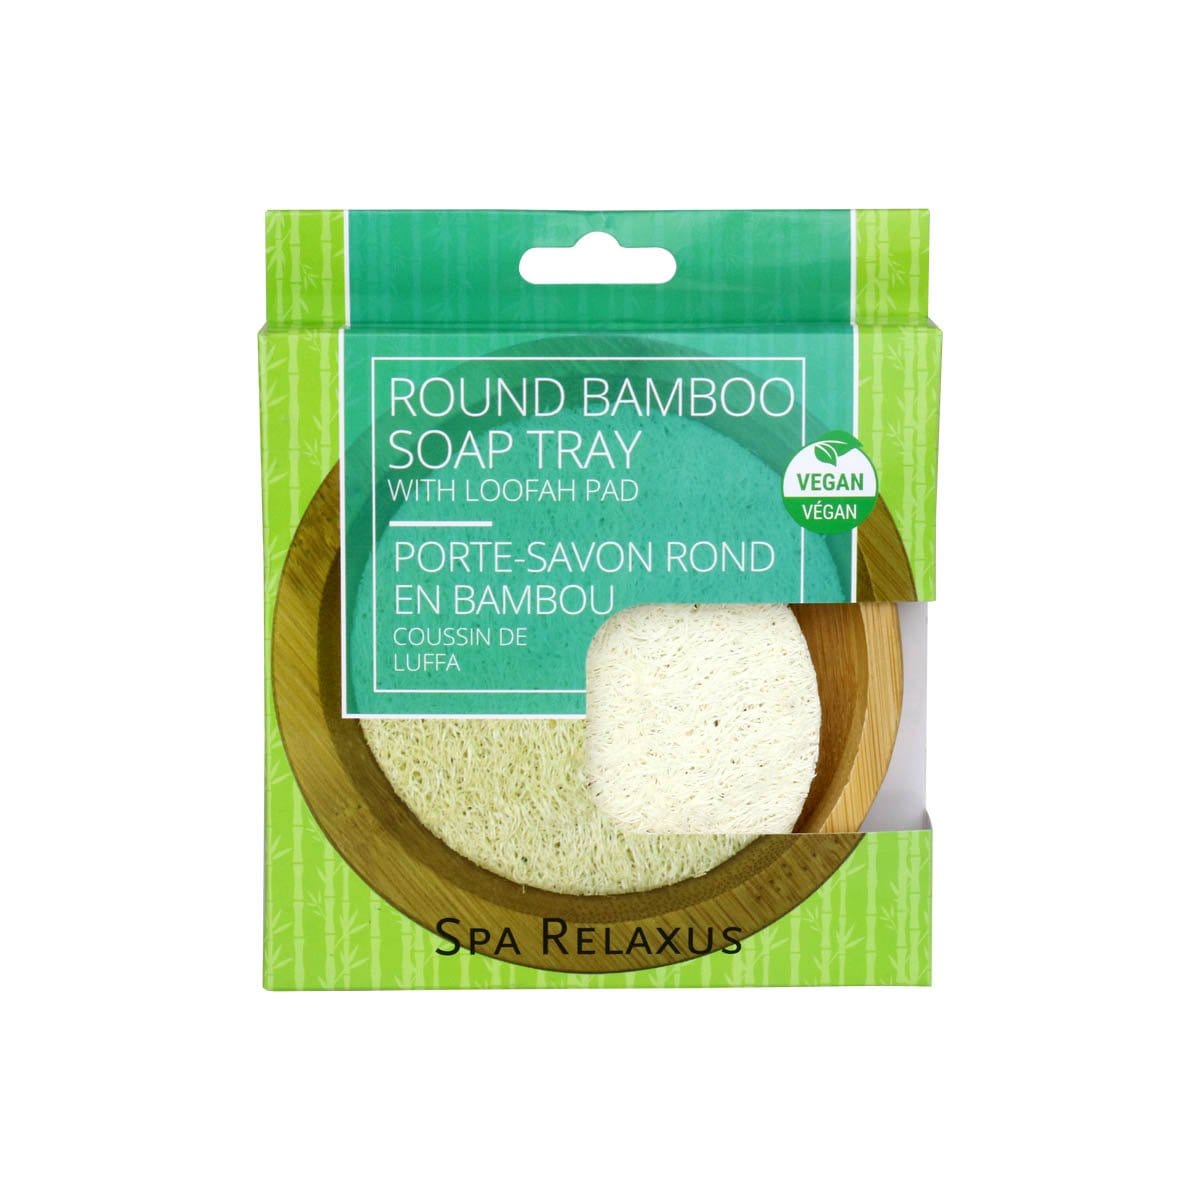 Round Bamboo Soap Tray with Loofah Pad